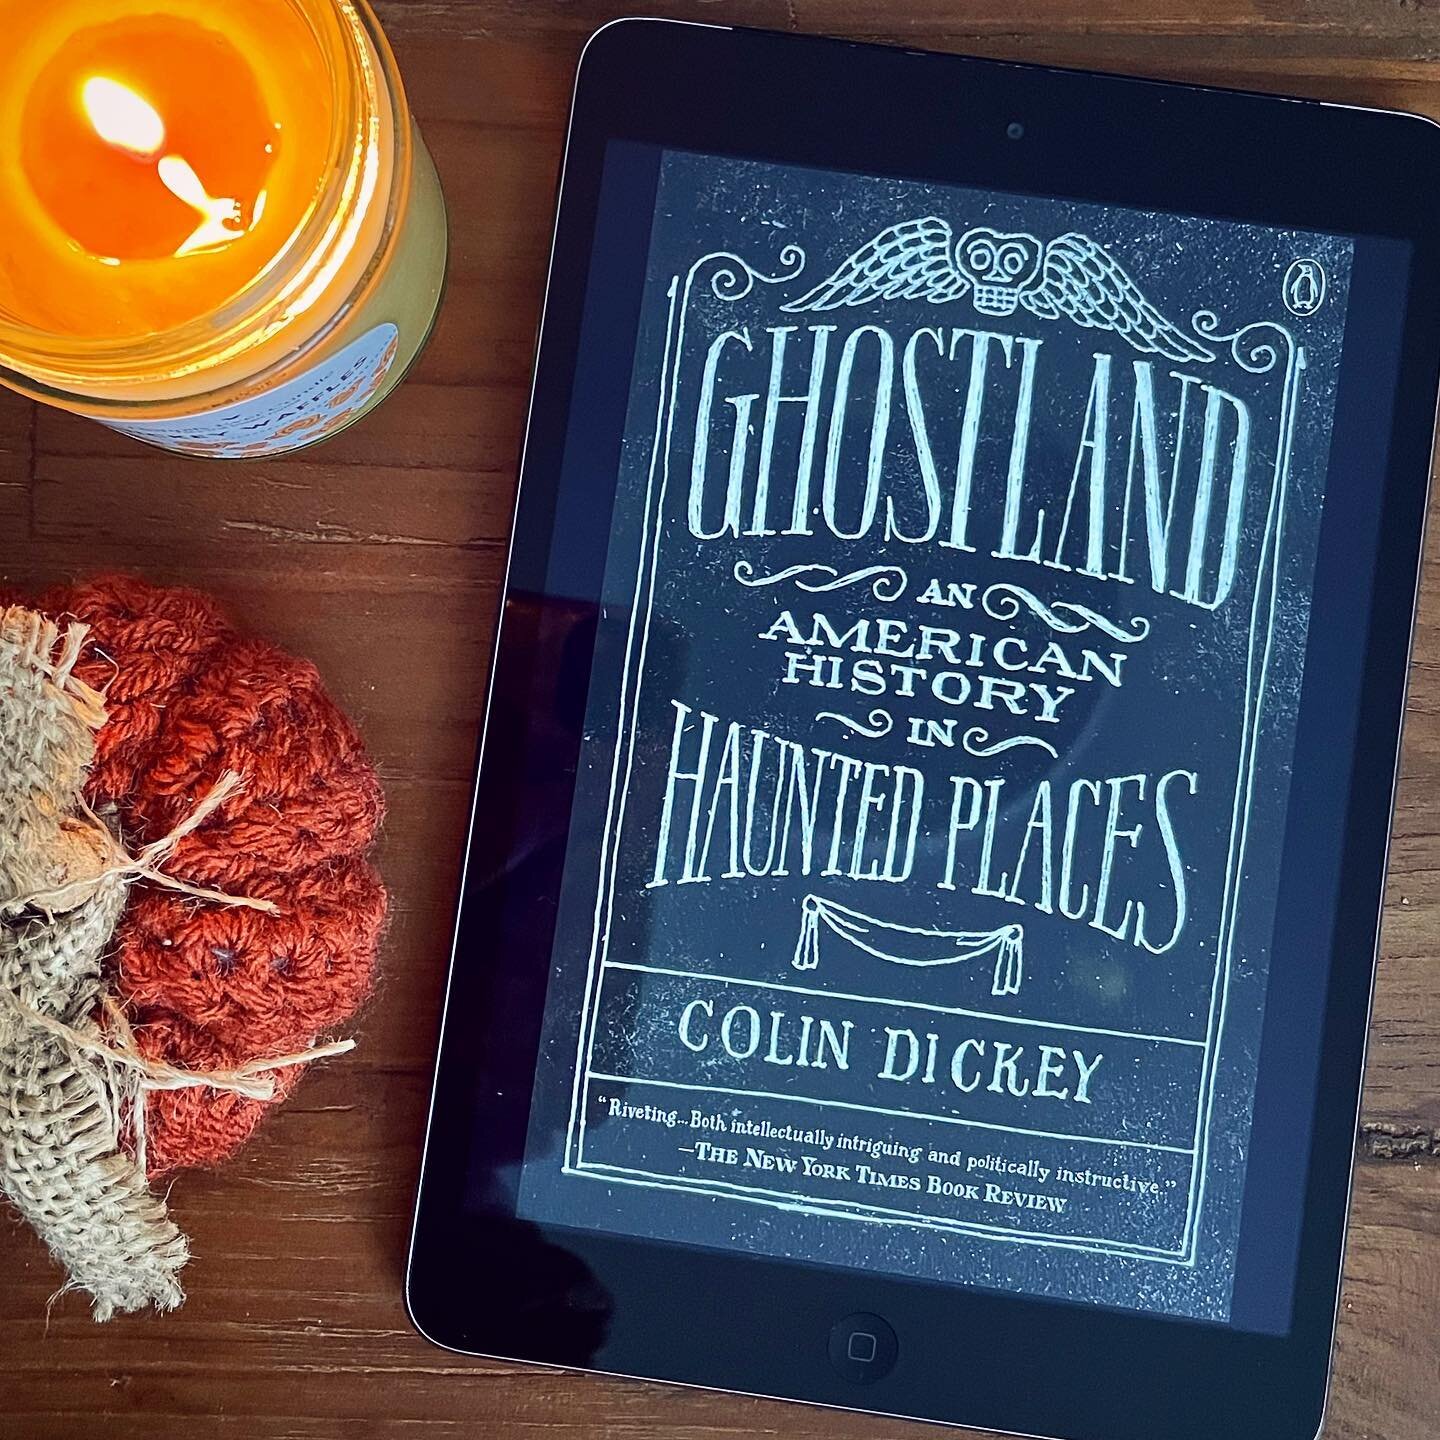 &ldquo;Paying attention to the way ghost stories change through the years &mdash; and why these changes are made &mdash; can tell us a great deal about how we face our fears and anxieties.&rdquo; (8)
.
&lsquo;Ghostland: An American History in Haunted